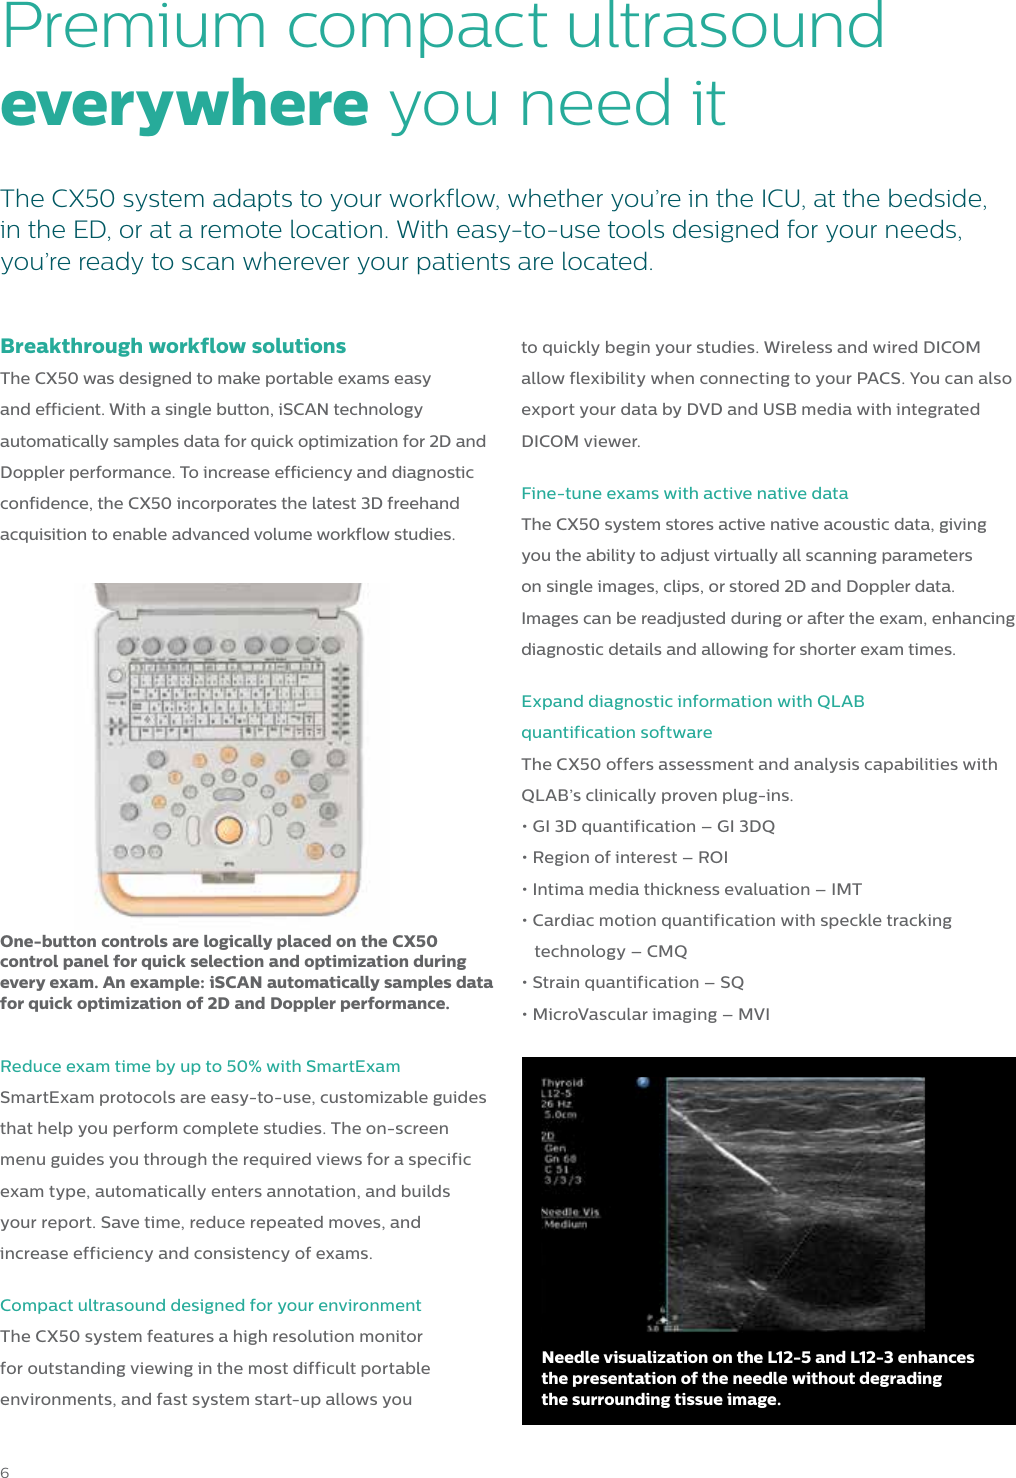 Page 6 of 8 - Philips 795076GI User Manual Product Brochure CX50 General Imaging Ultrasound System Cbcd5c5549d14fa096b2a77c0161aee4